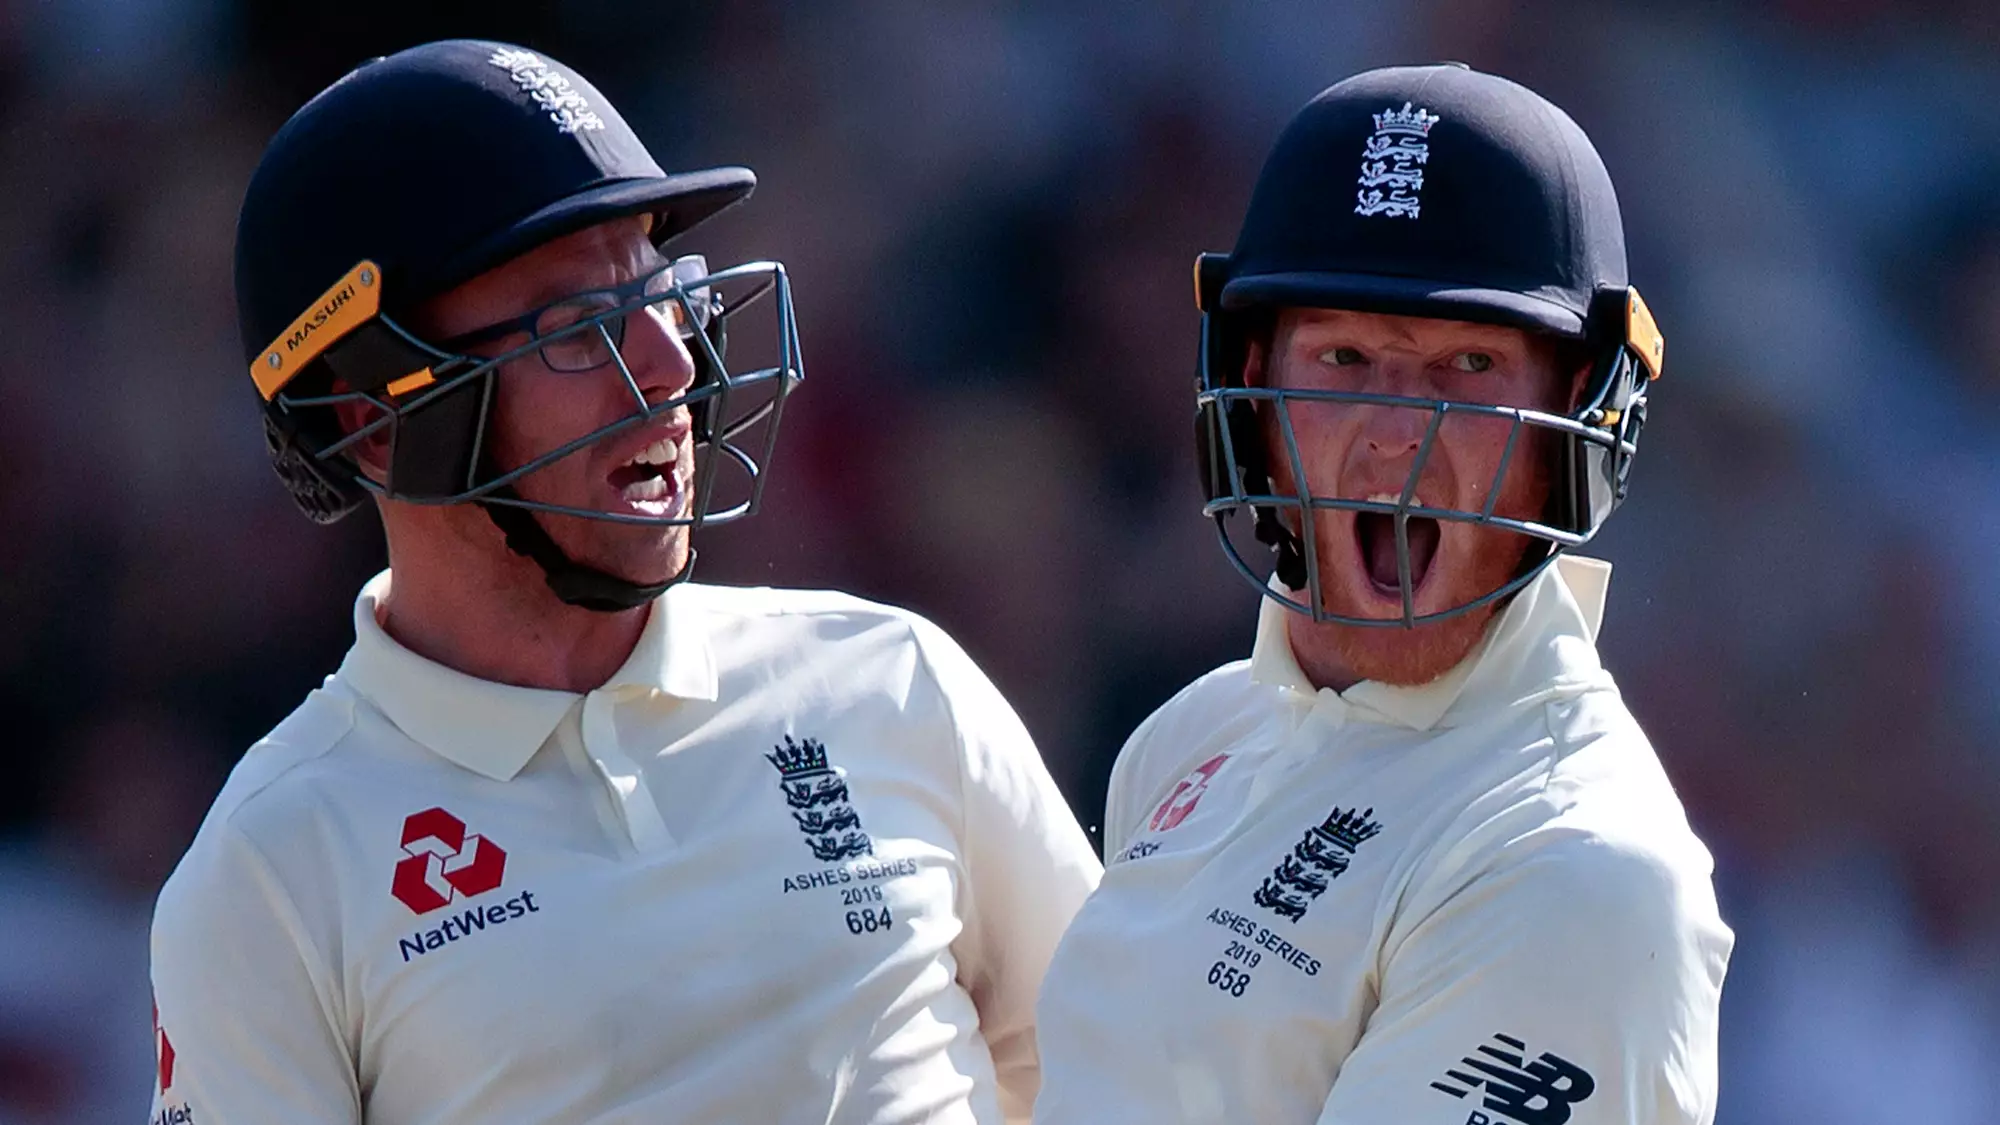 Specsavers Offer England's Unlikely Hero Jack Leach Free Glasses For Life